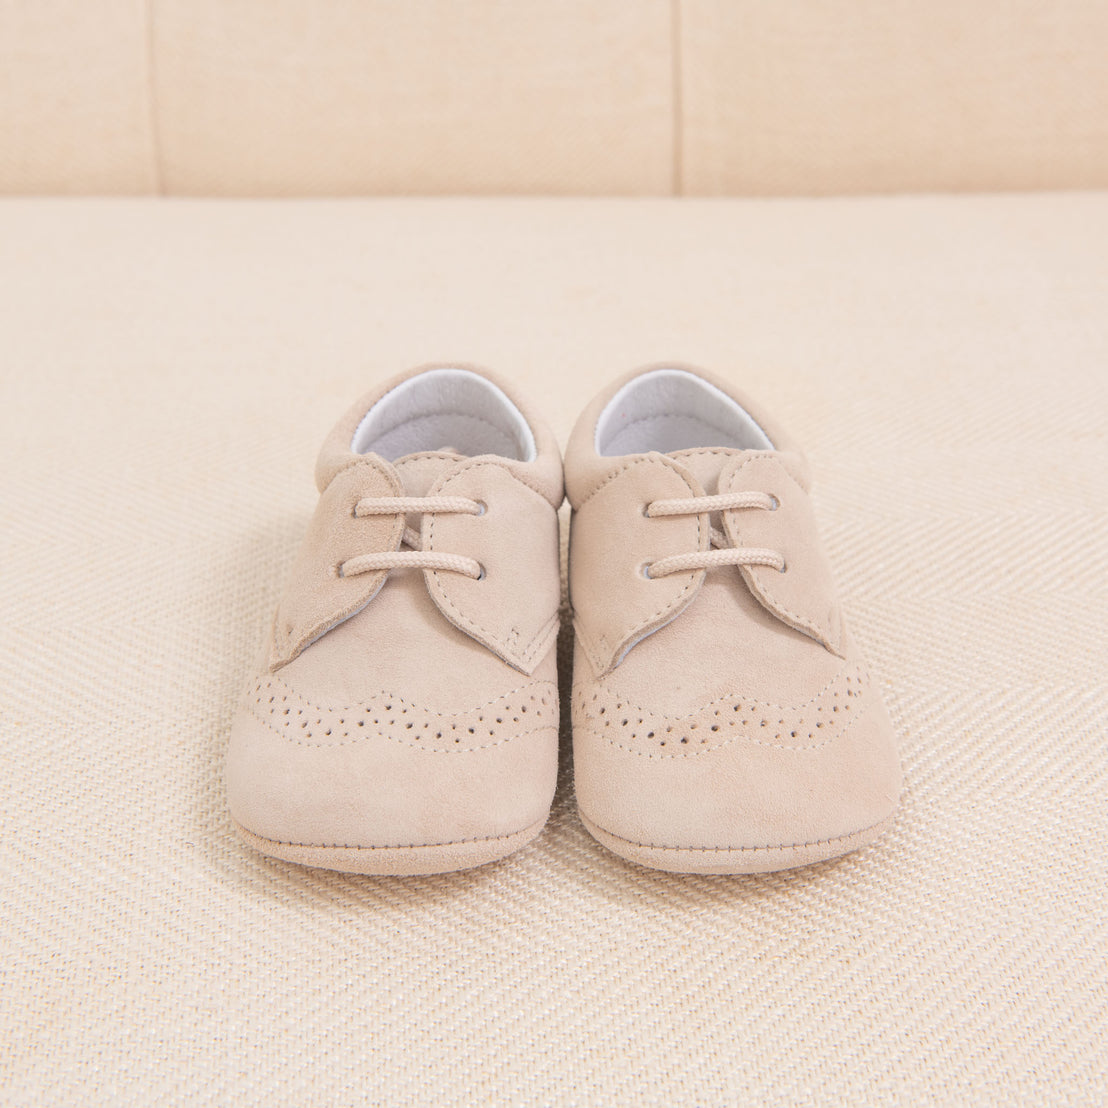 A pair of Baby Beau & Belle beige suede boys' shoes with laces and brogue detailing, placed neatly on a soft, textured beige background.